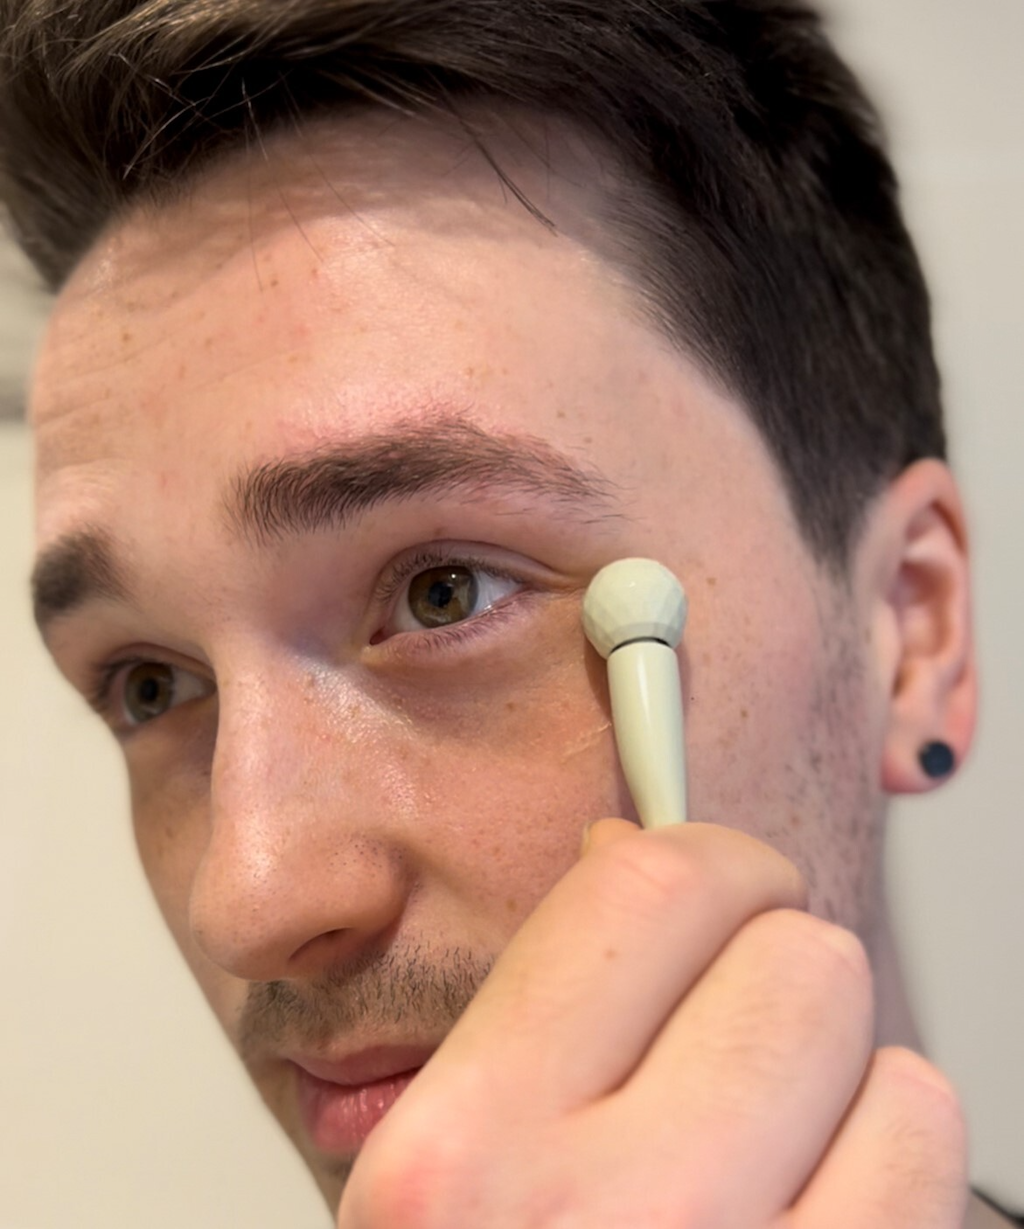 how to use the upcircle eye roller tool. Photo of a man with brown hair and eyes rolling the eye roller underneath the eye area